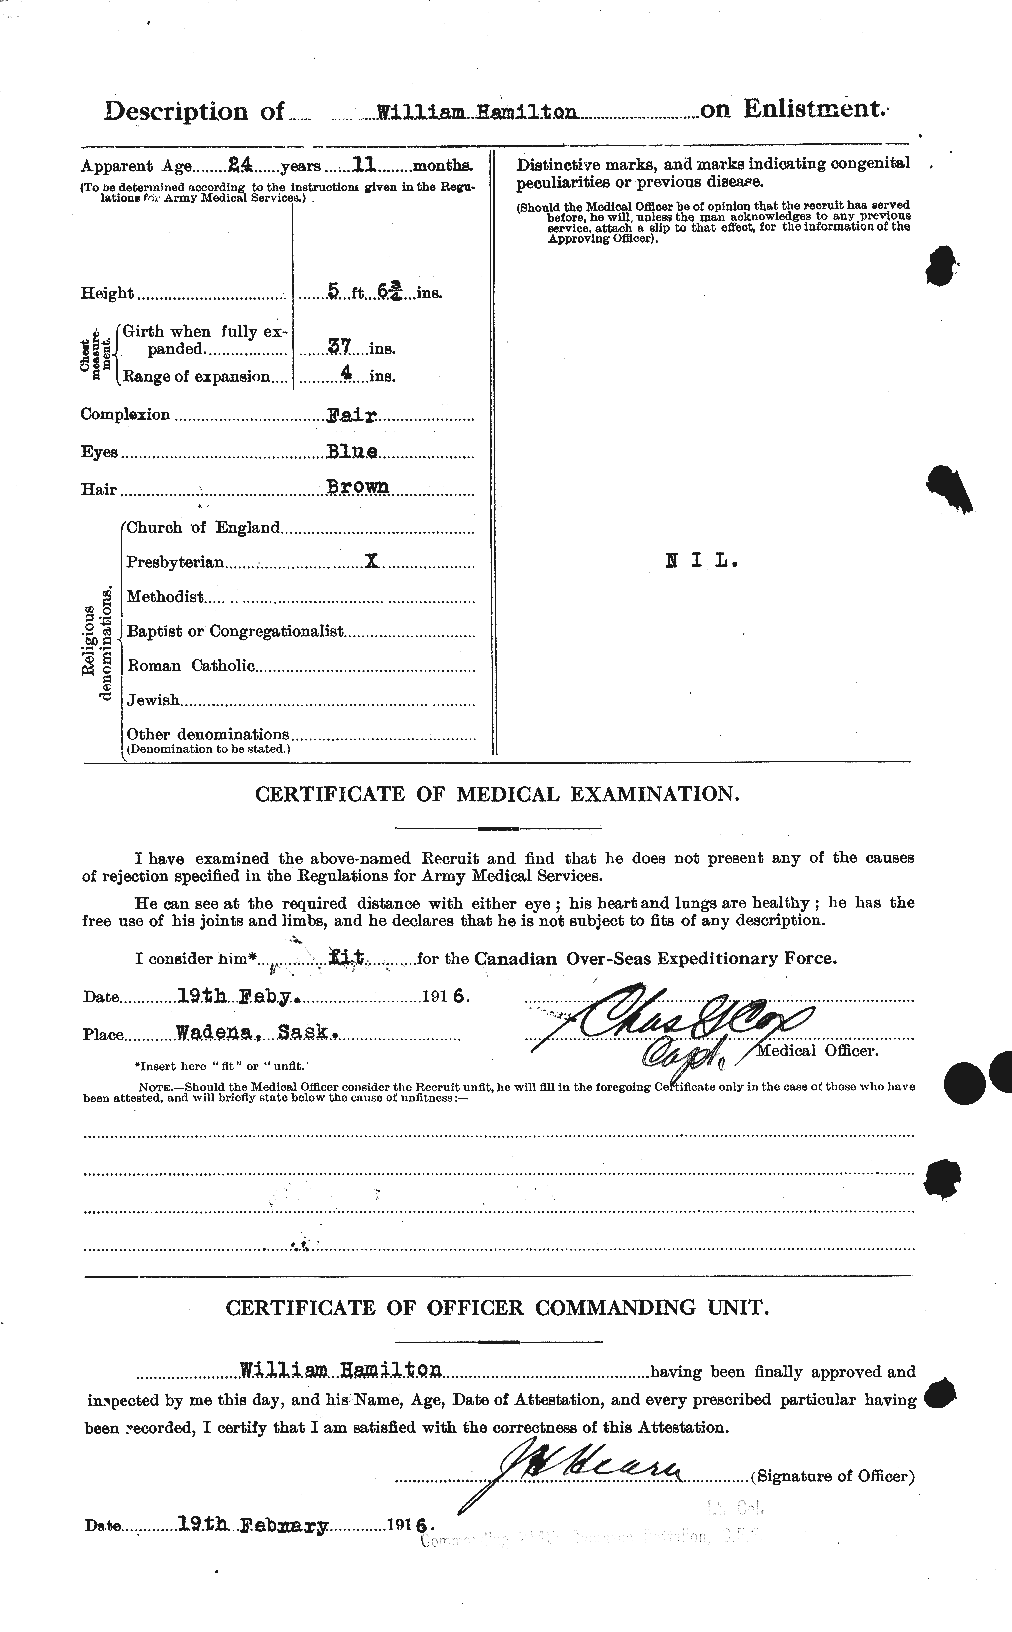 Personnel Records of the First World War - CEF 374837b